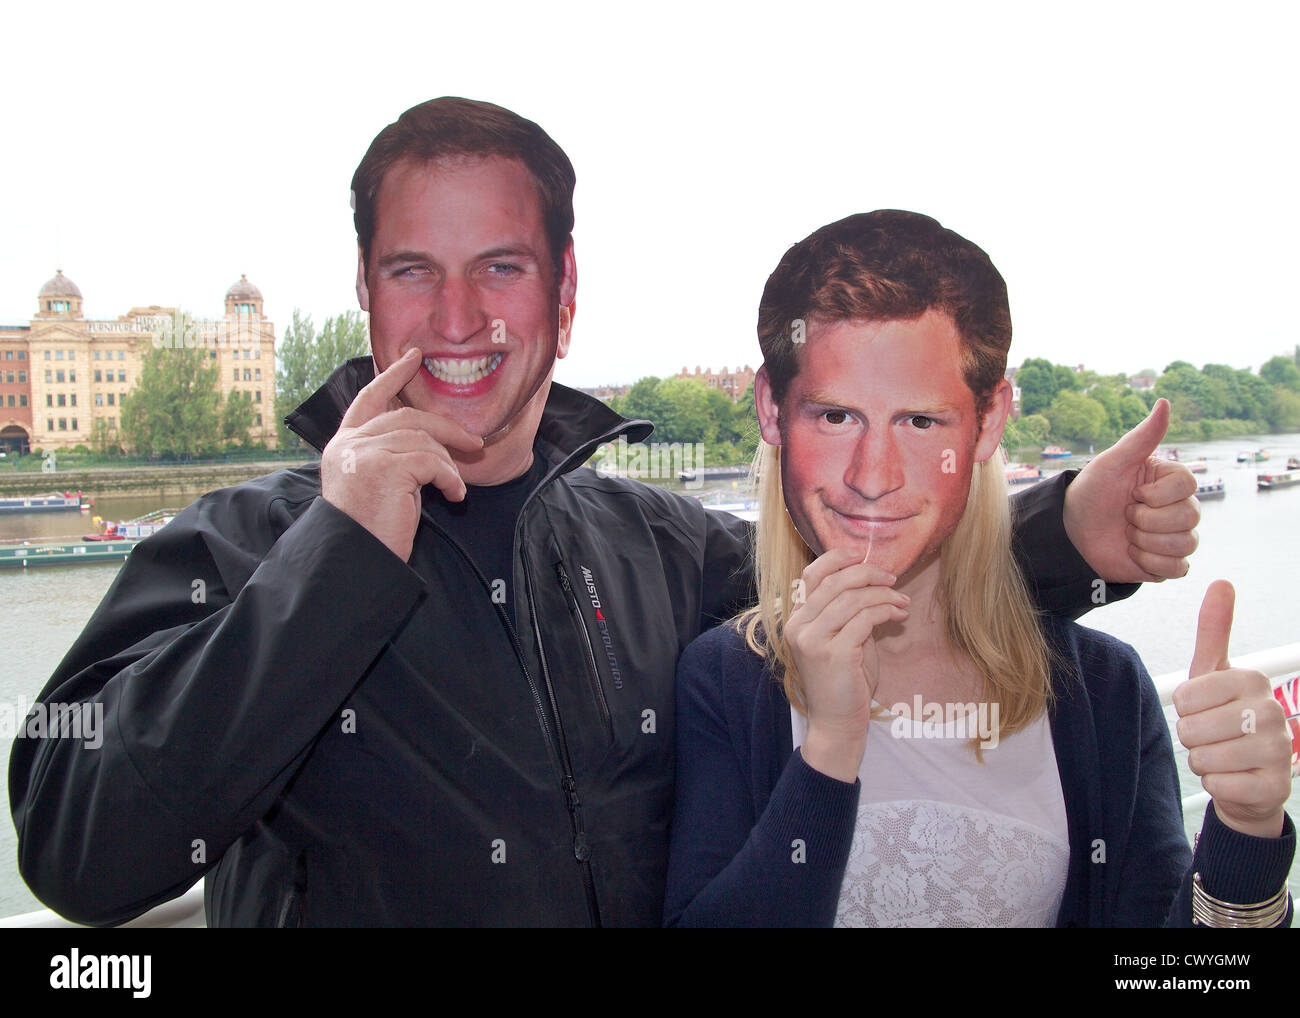 Prince William and Prince Harry masks at the Diamond Jubilee celebrations Stock Photo